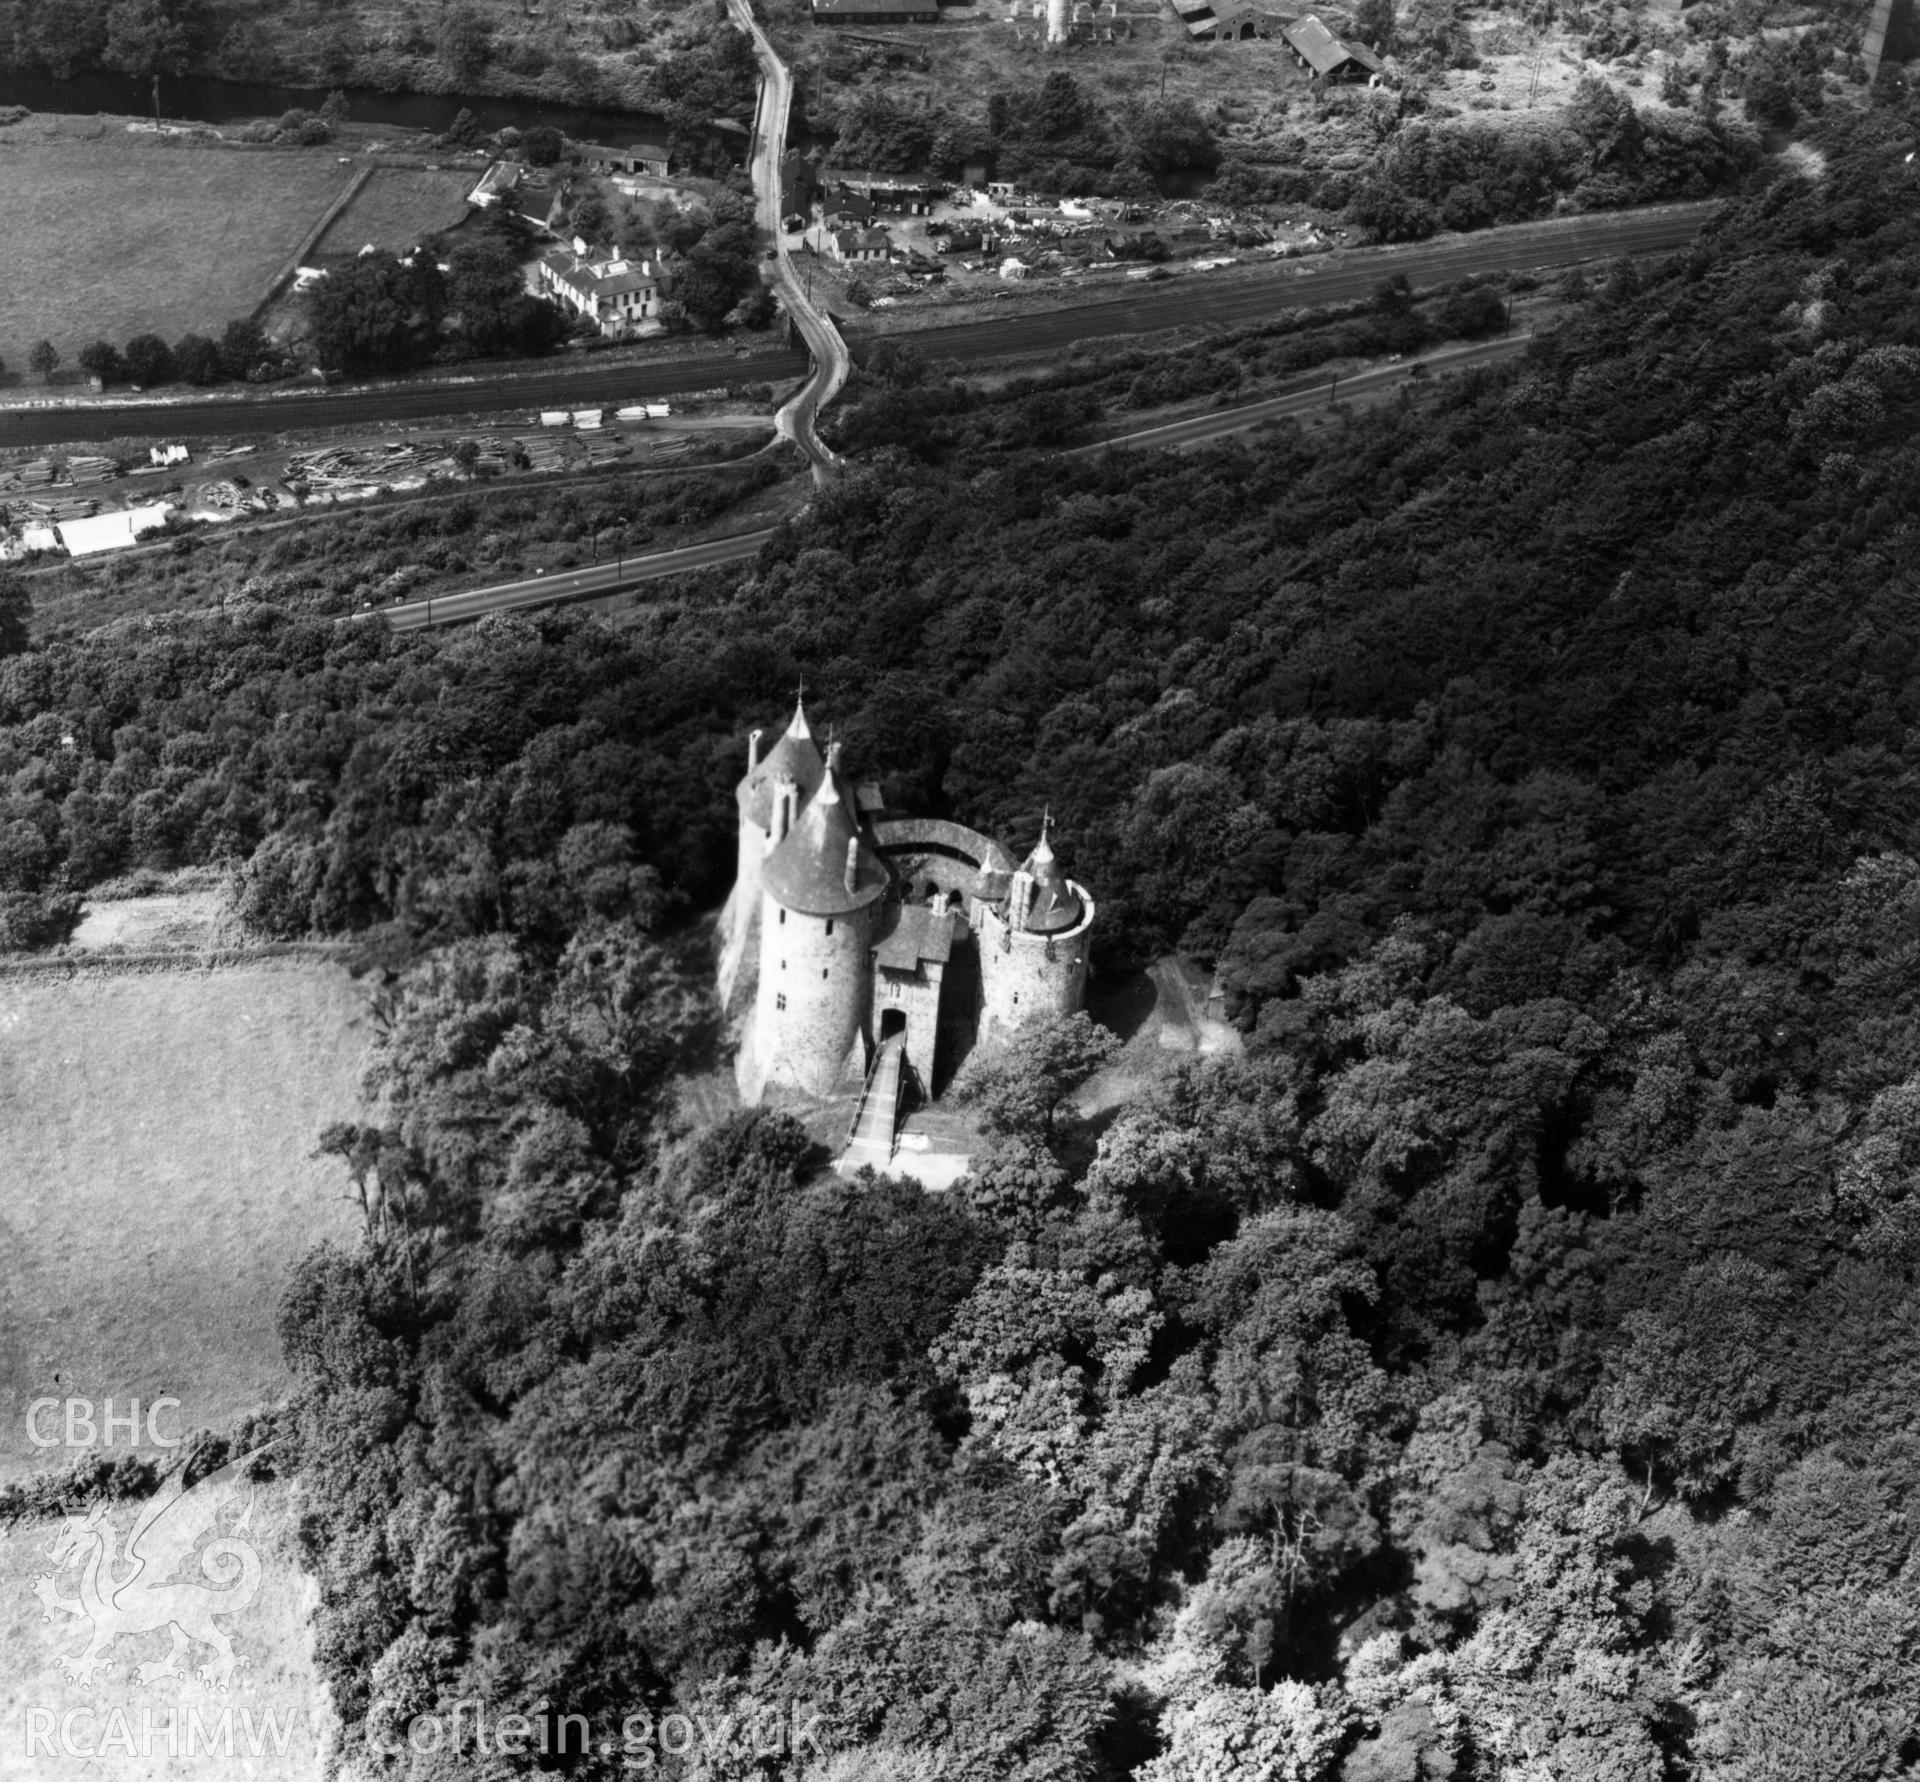 View of Castell Coch, Tongwynlais, showing Ynys House and road bridge. Oblique aerial photograph, 5?" cut roll film.